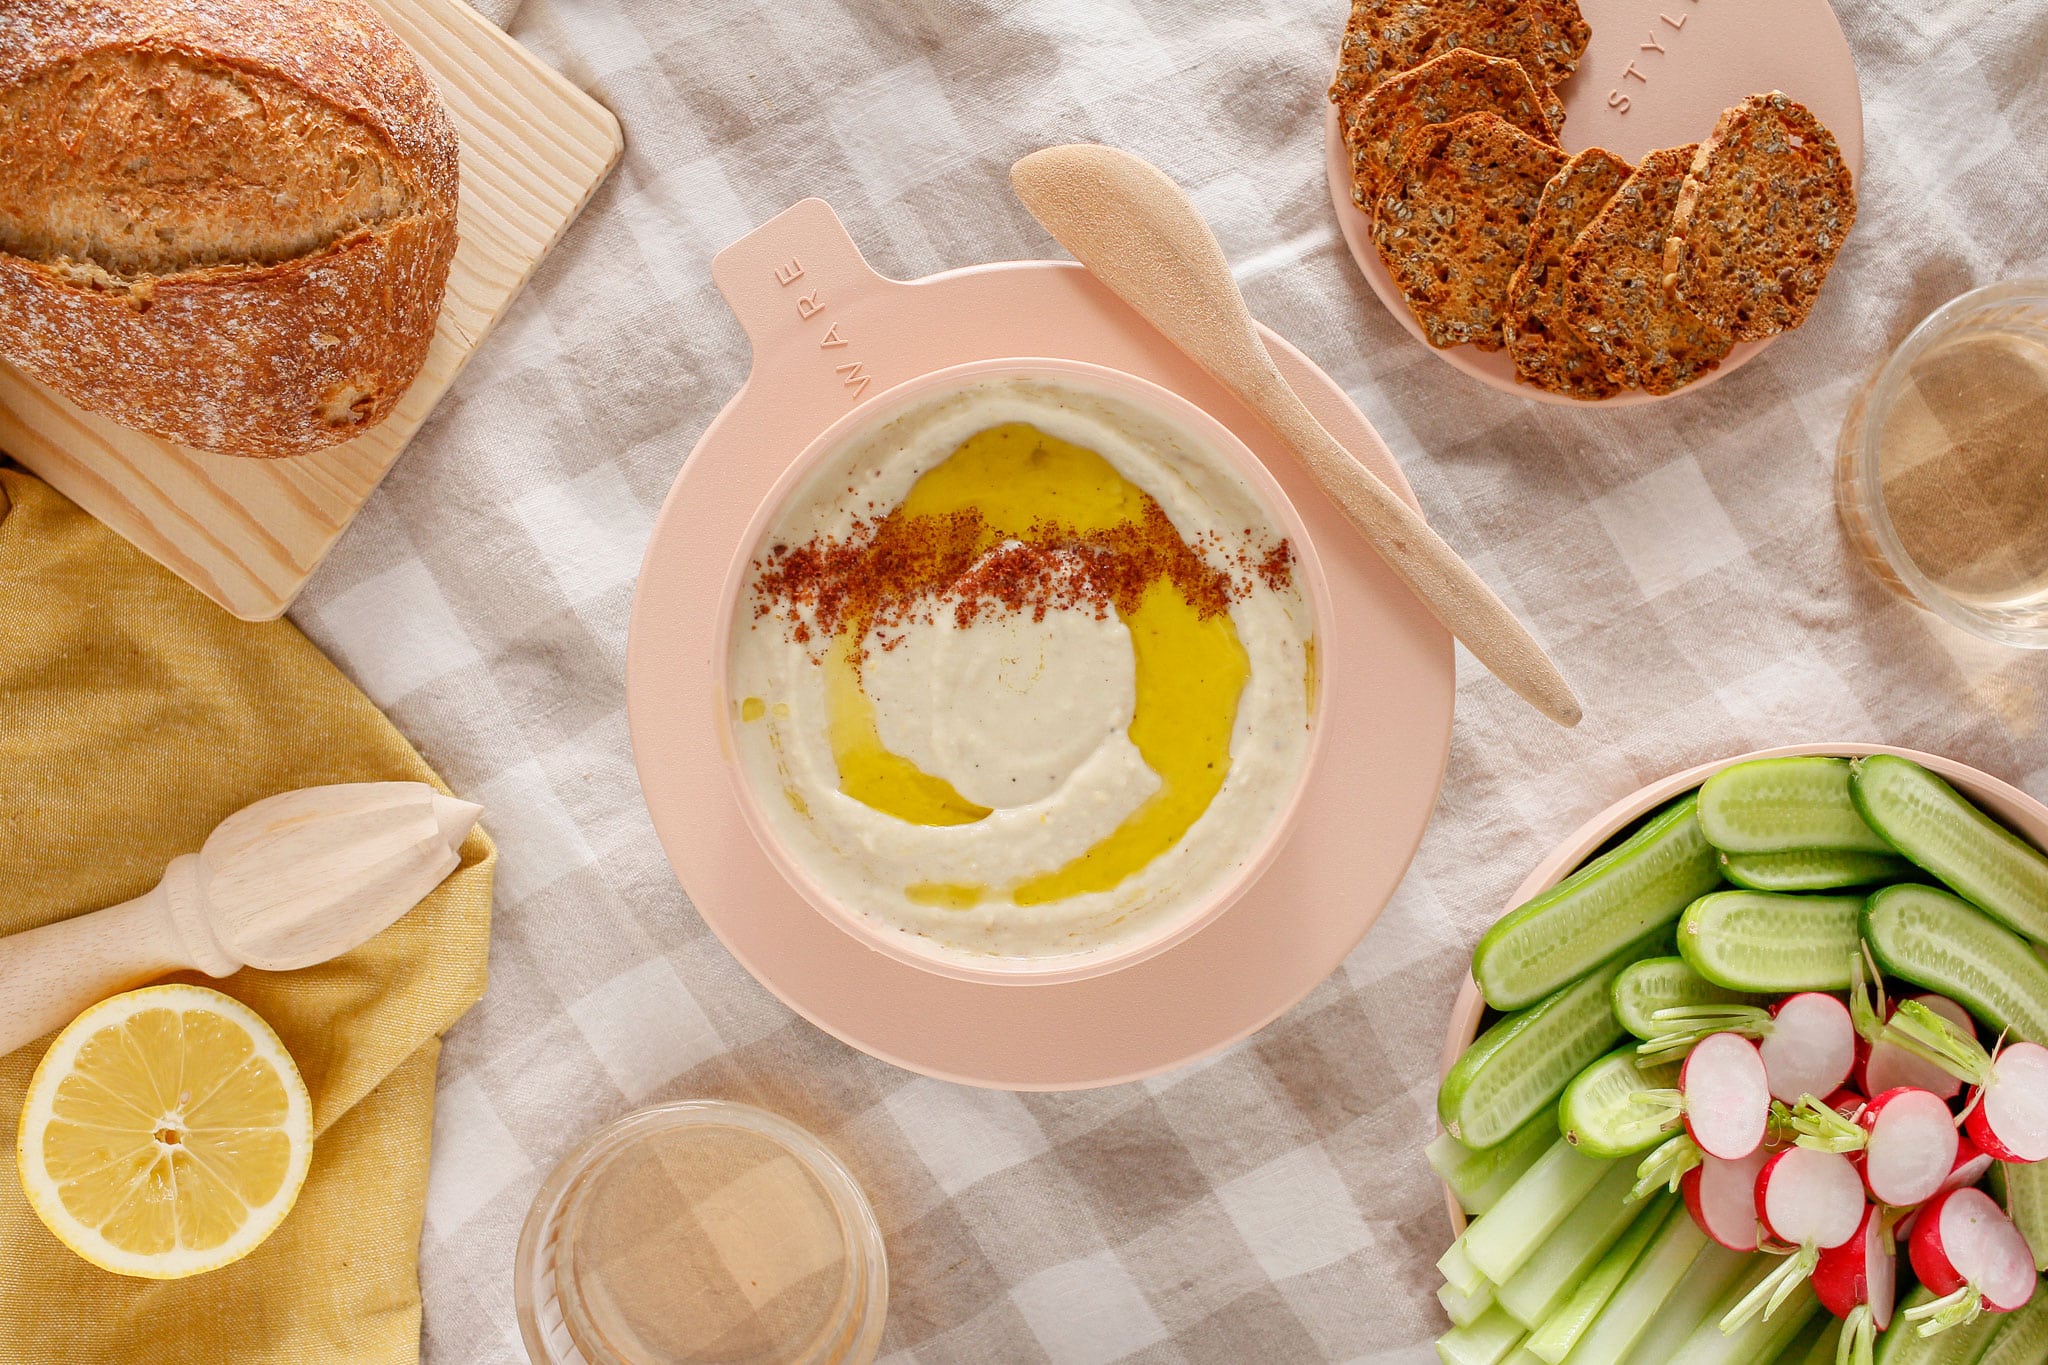 Dips and crudites are the perfect finger foods for picnic fare.